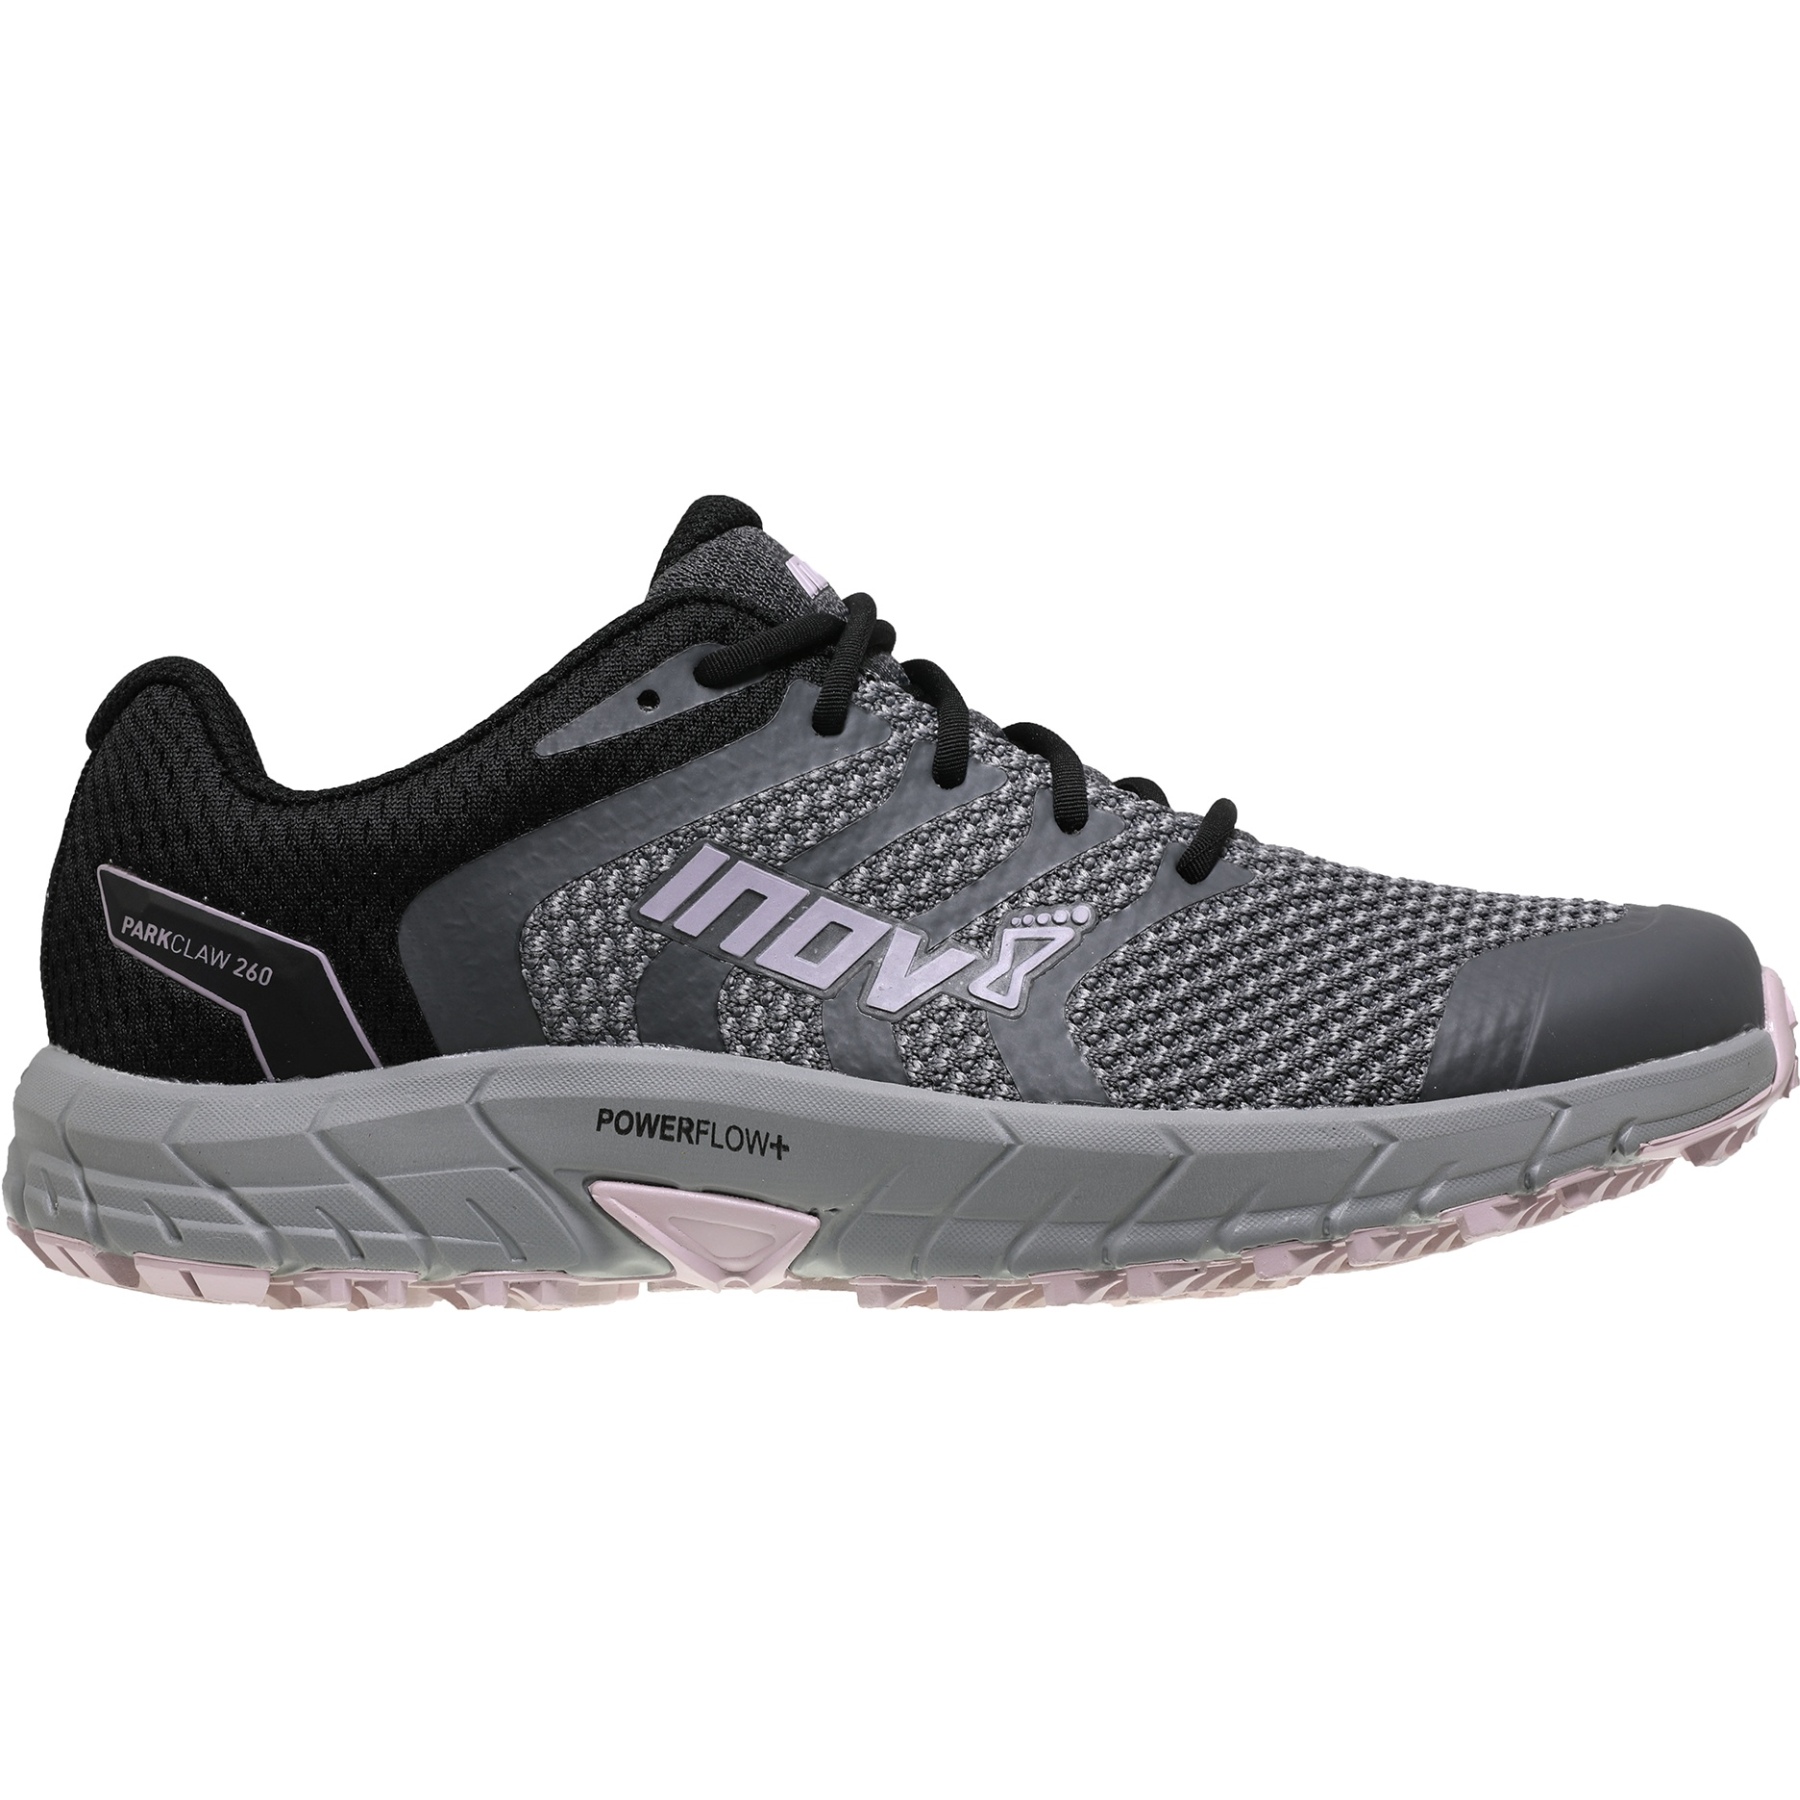 Image of Inov-8 Parkclaw 260 Knit Wide Women's Running Shoes - grey/black/pink